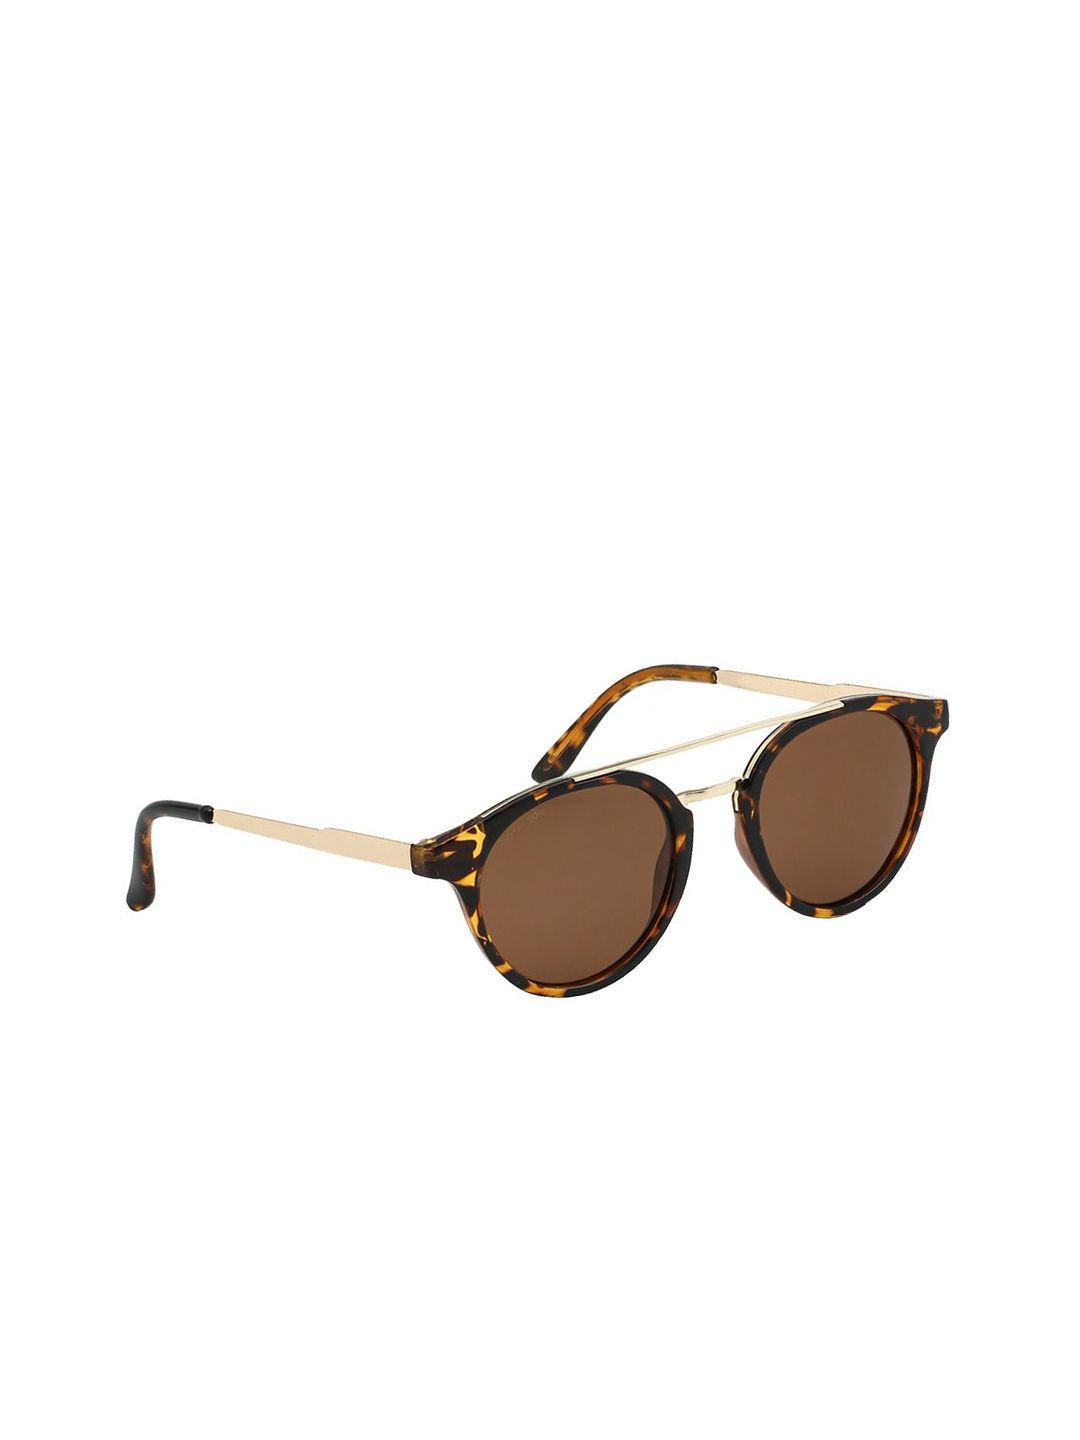 ROYAL SON Unisex Brown Round Sunglasses with Polarised and UV Protected Lens CHI0090-C2-R2 Price in India